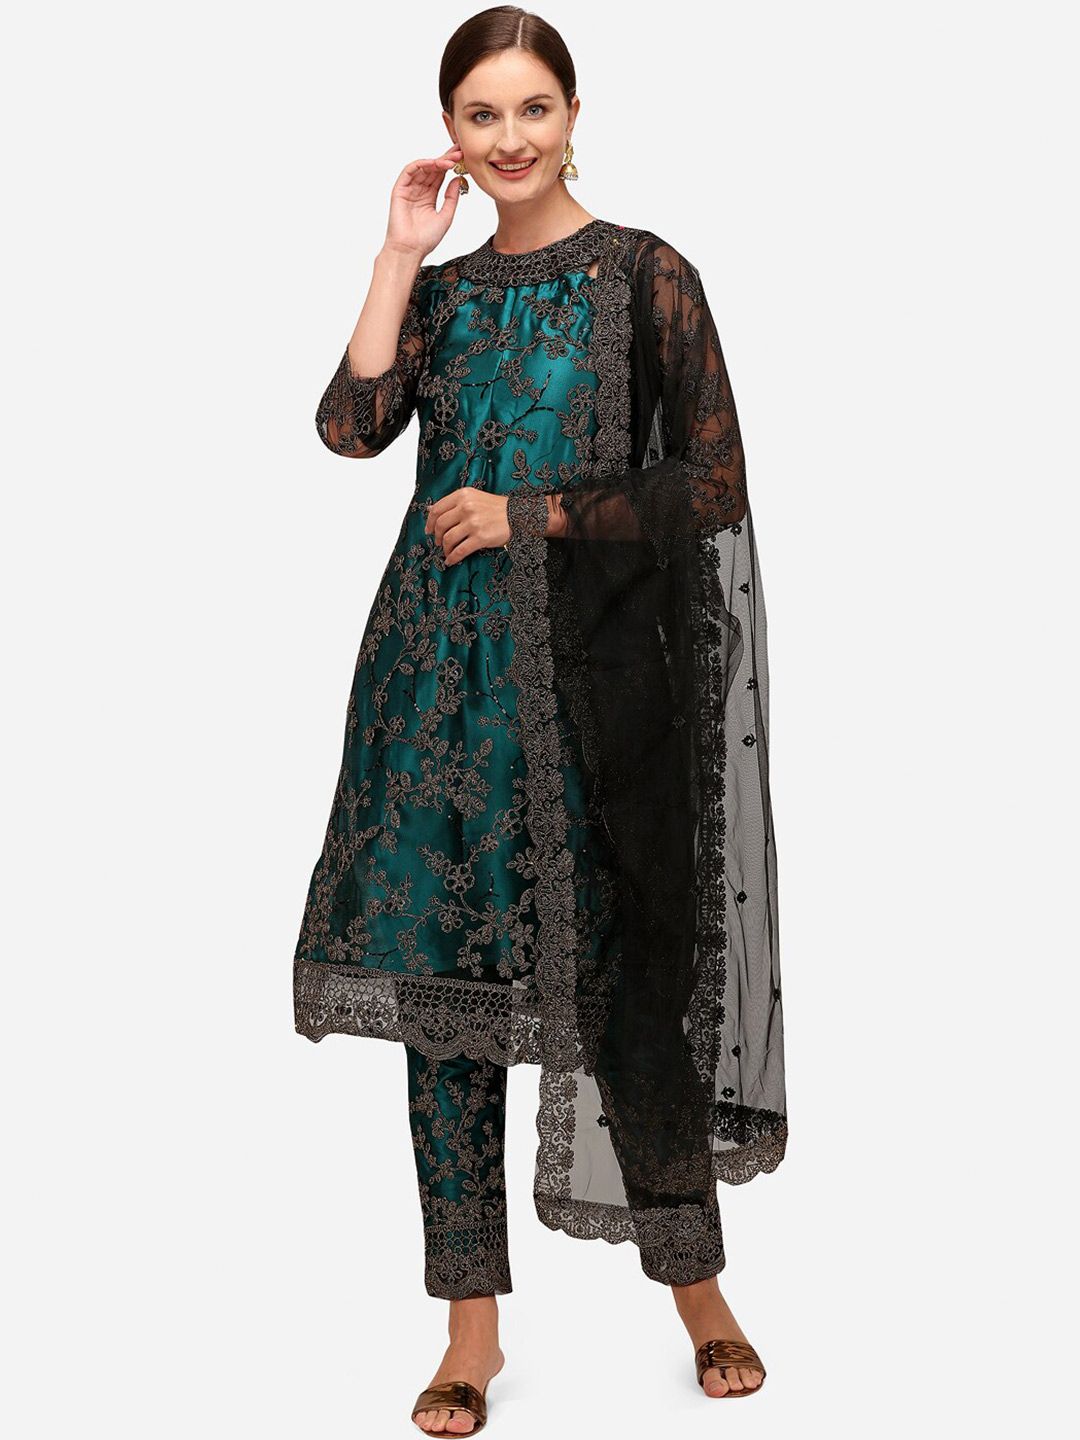 JATRIQQ Black & Green Embroidered Unstitched Dress Material Price in India